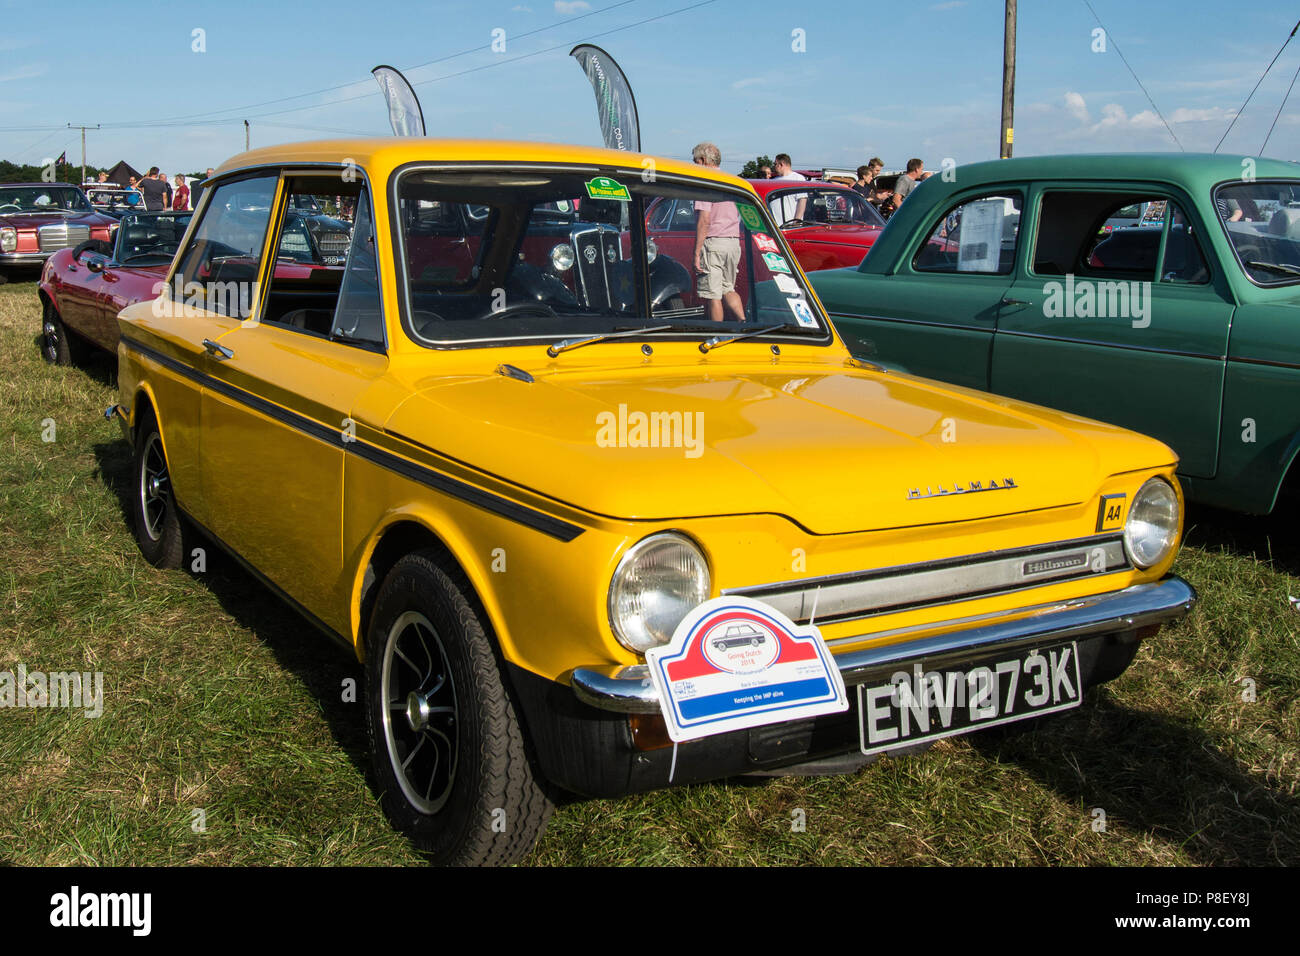 Classic cars Hillman Imp yellow vehicle old fashioned smart small little car vehicle style nice looks parked on show outside grass sign signs clean Stock Photo